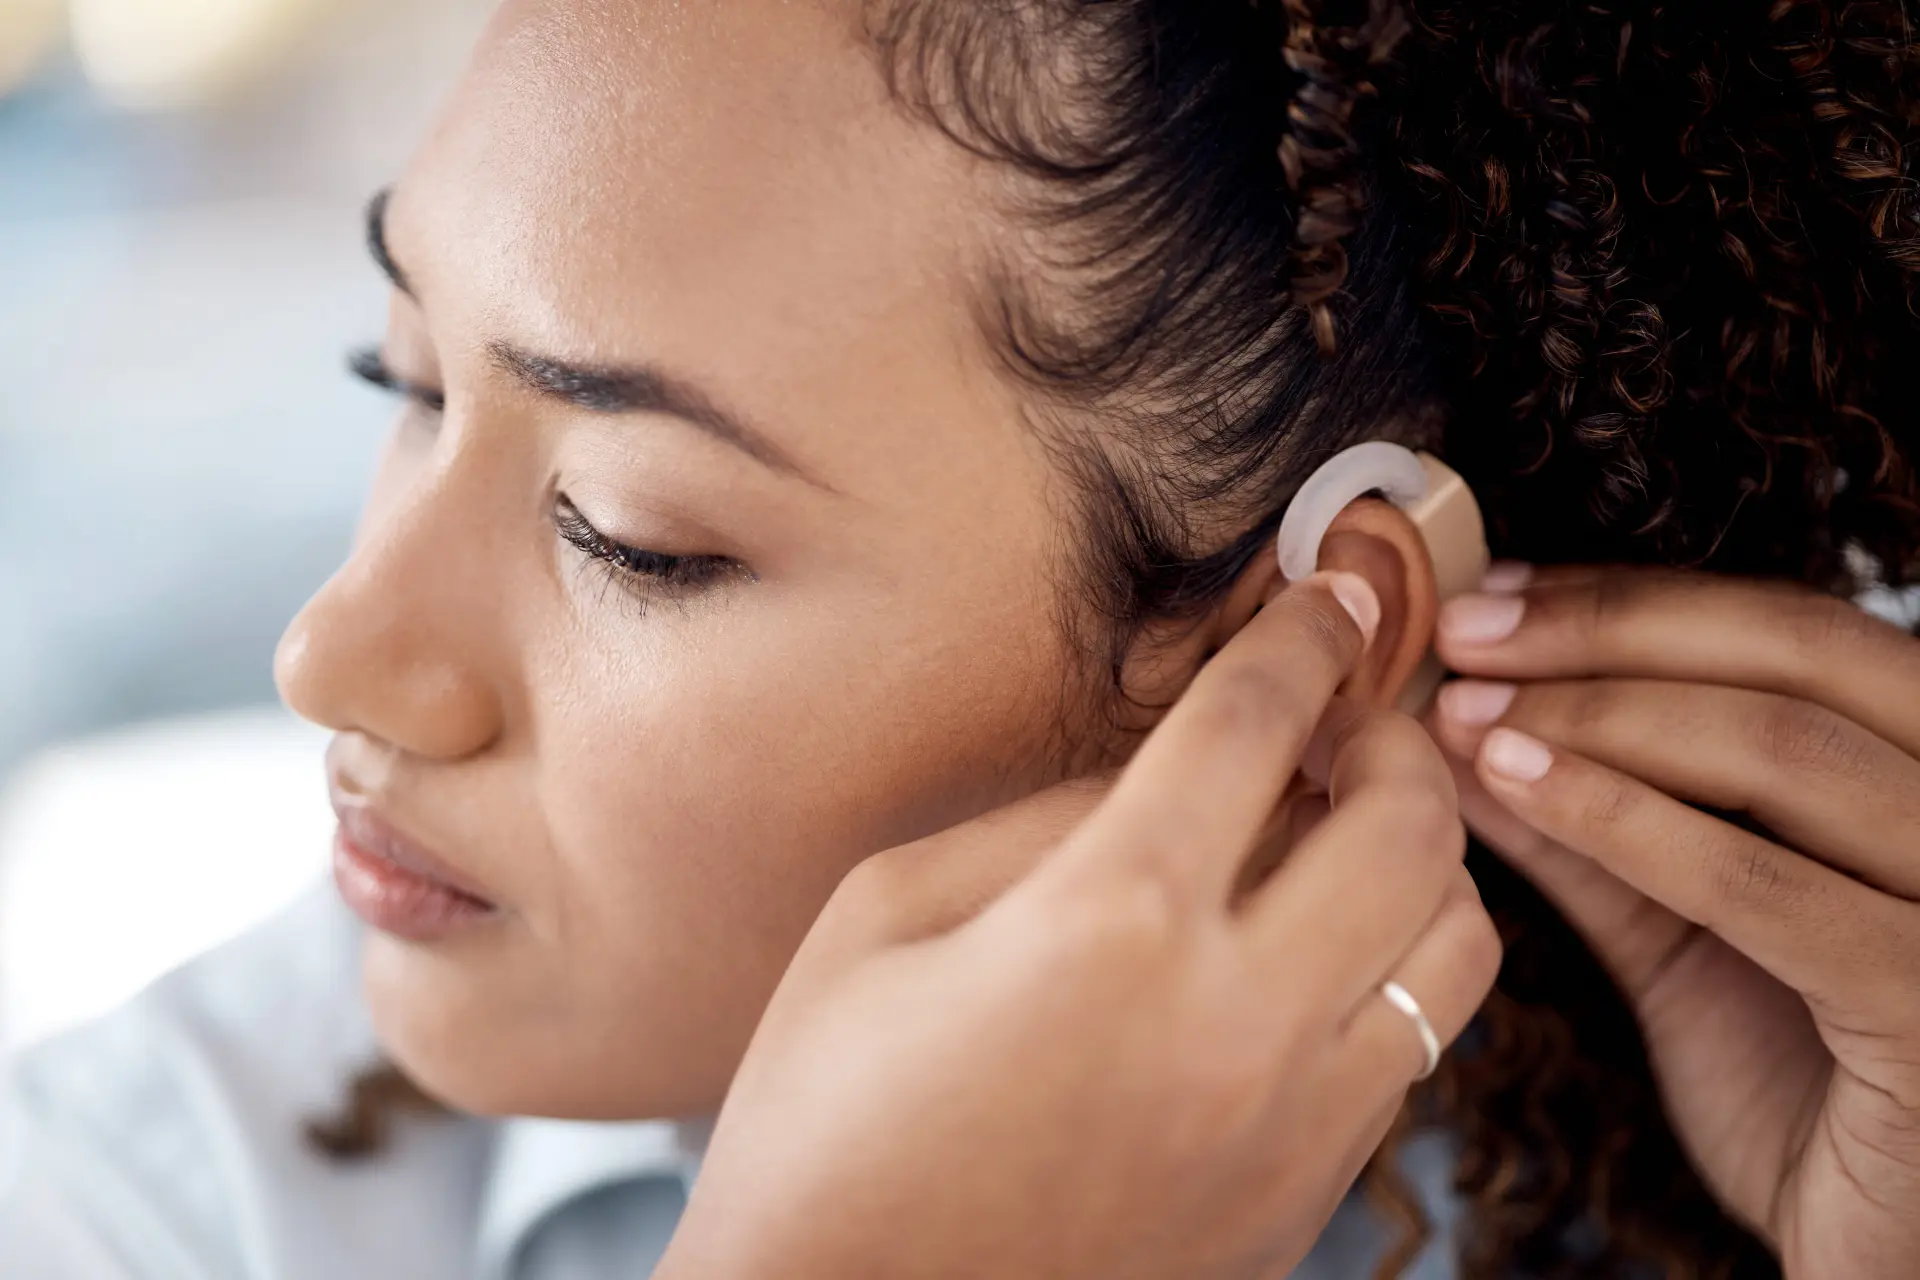 a person adjusts their cochlear implant to fit better on their ear